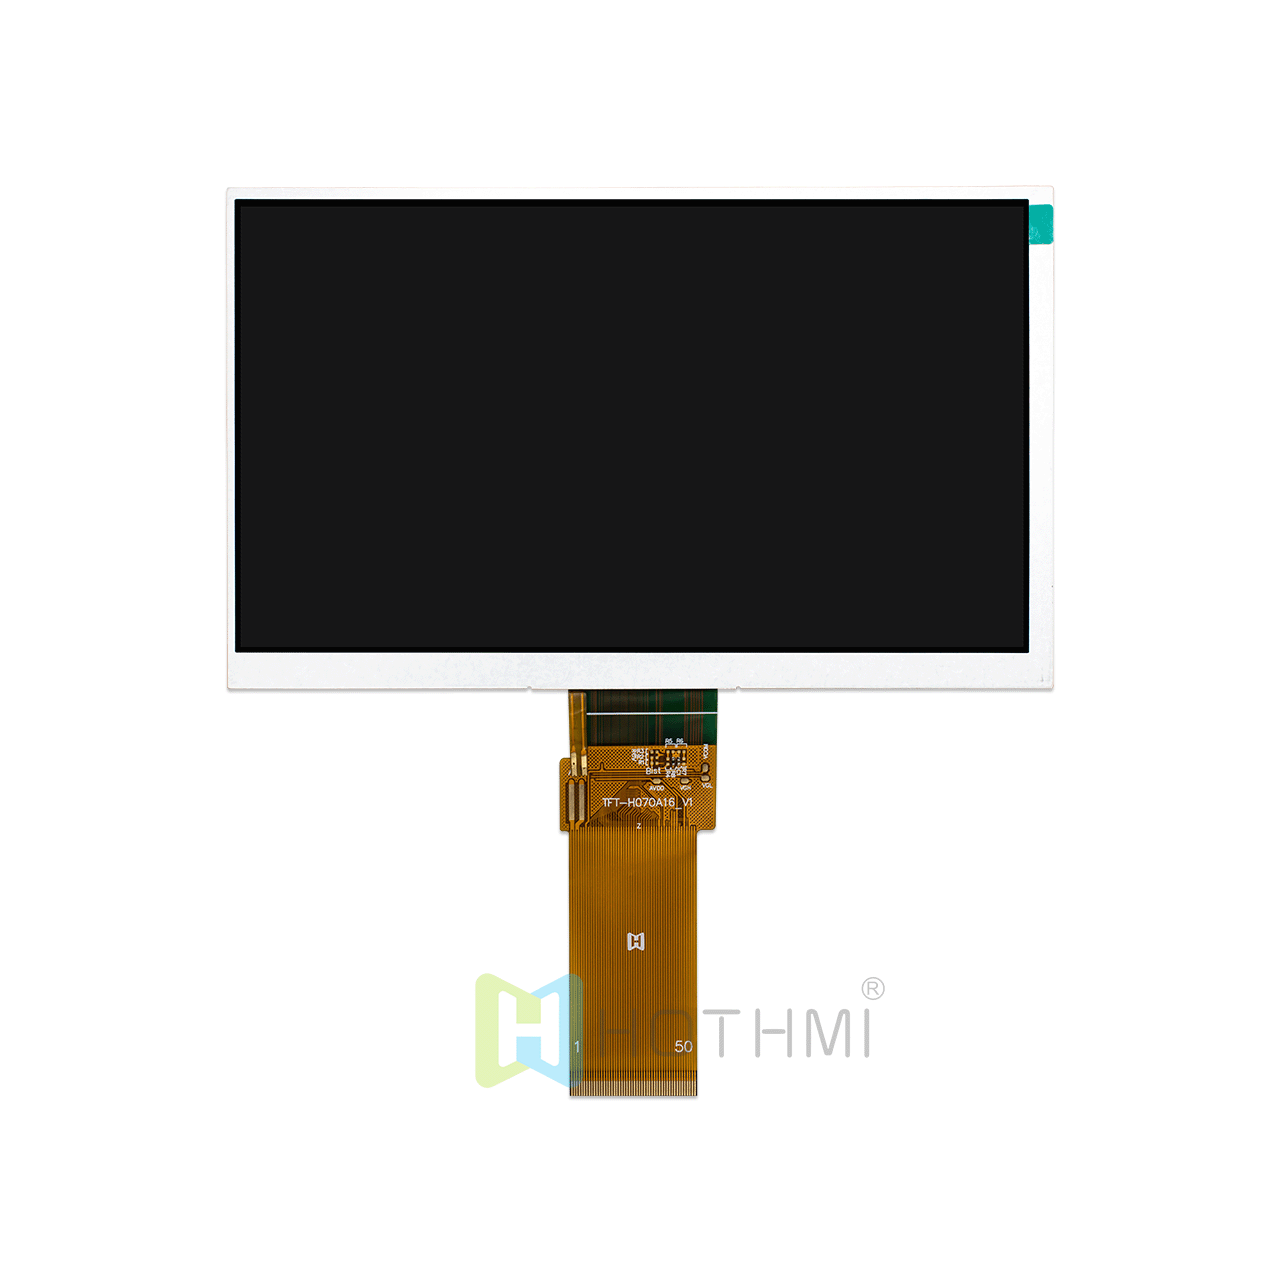 7-inch TFT display TN 800x480px sunlight readable EK9716 RGB interface/can be equipped with touch screen